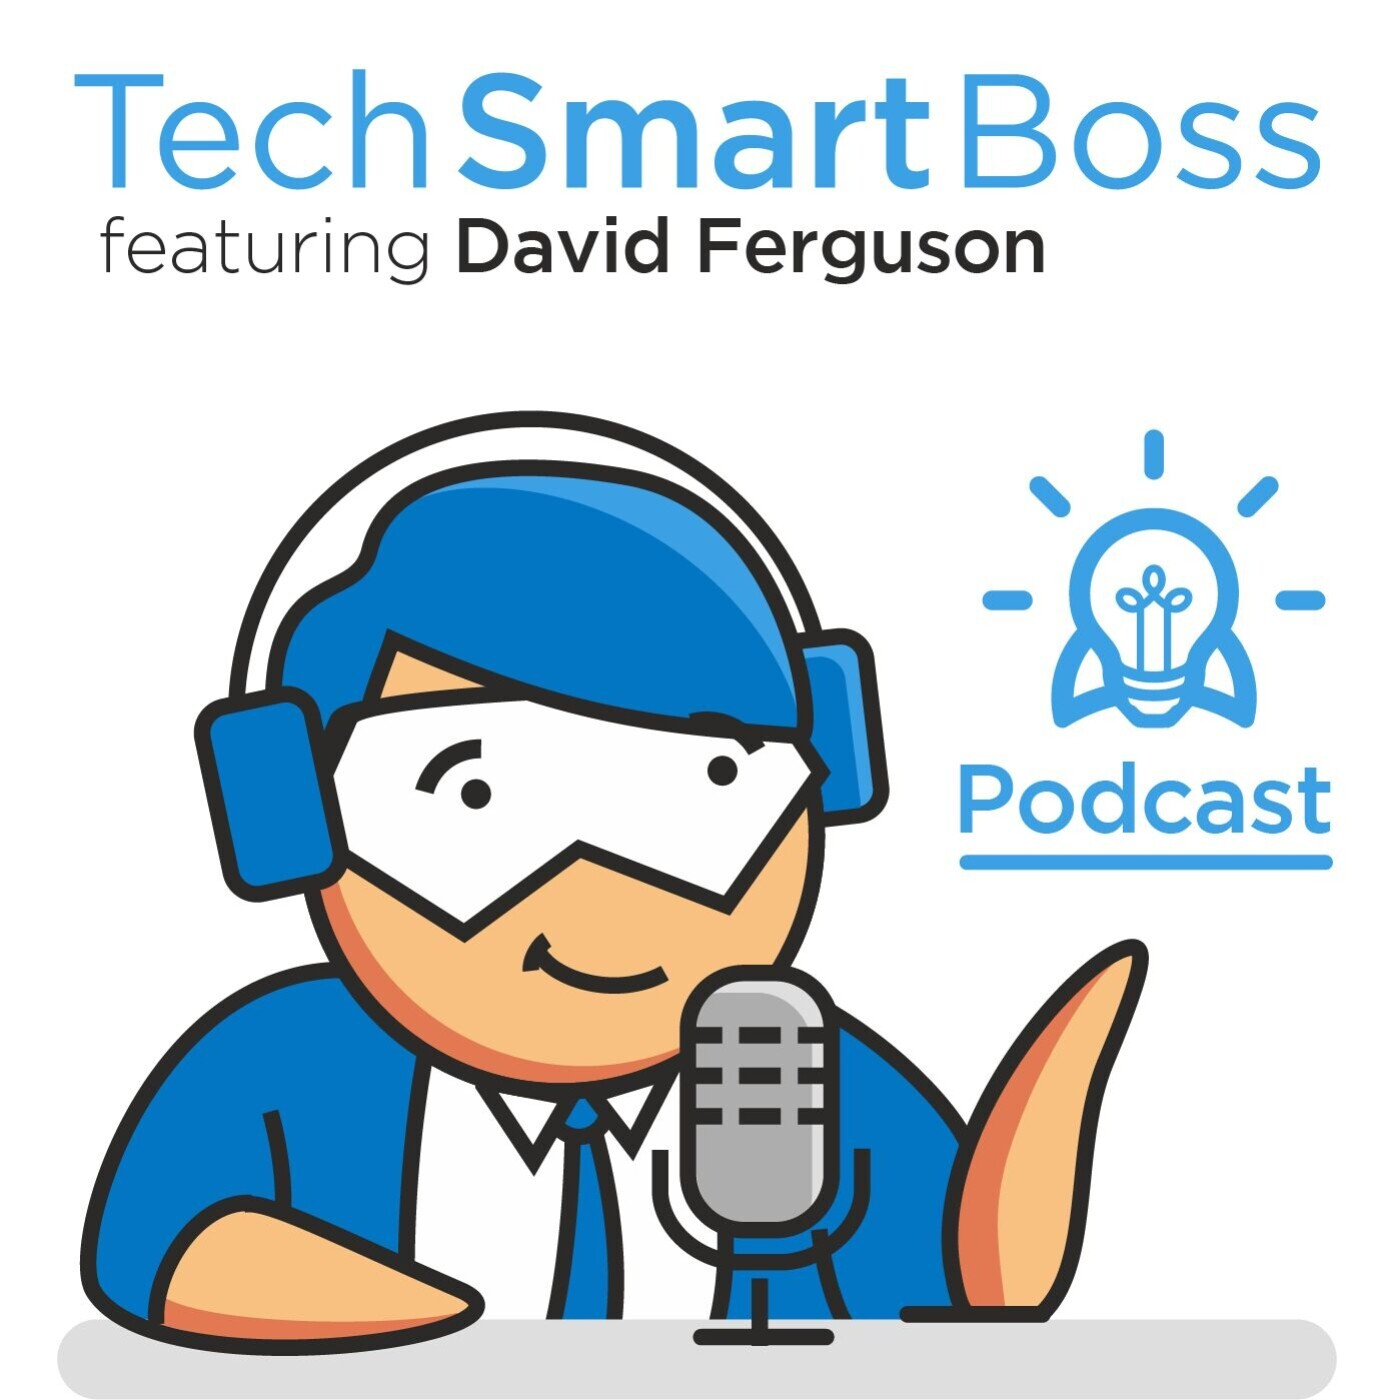 Episode 65: How To Monitor Your Competition (The Tech Smart Boss Way)